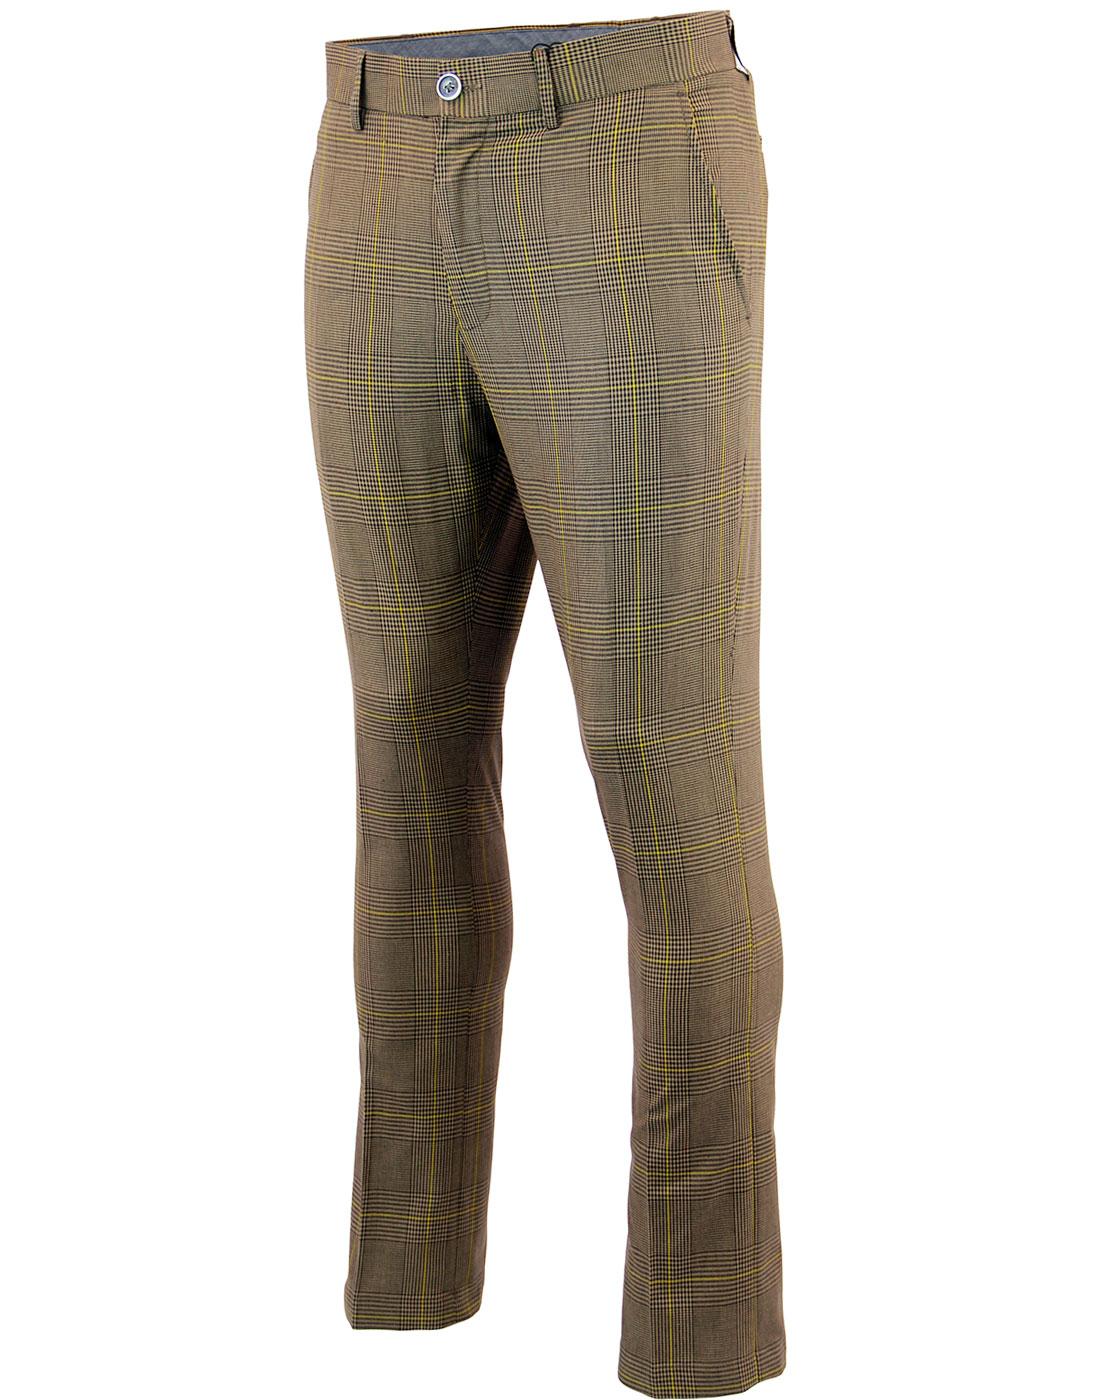 GABICCI VINTAGE Retro 1960s Mod Prince of Wales Check Trousers